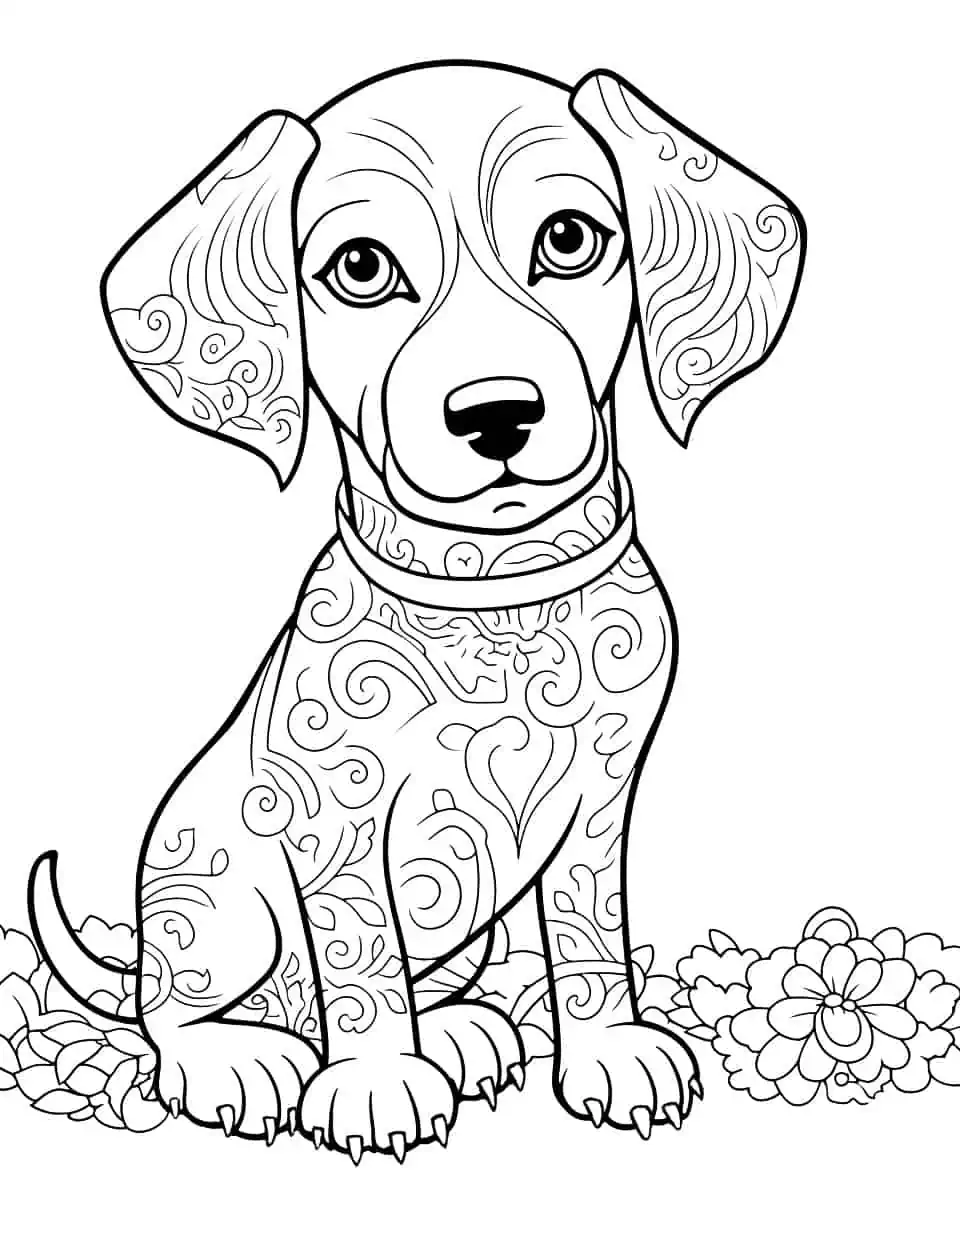 Mandala Background Dachshund Dog Coloring Page - A cute Dachshund with a beautiful mandala design in the background for older kids to color.